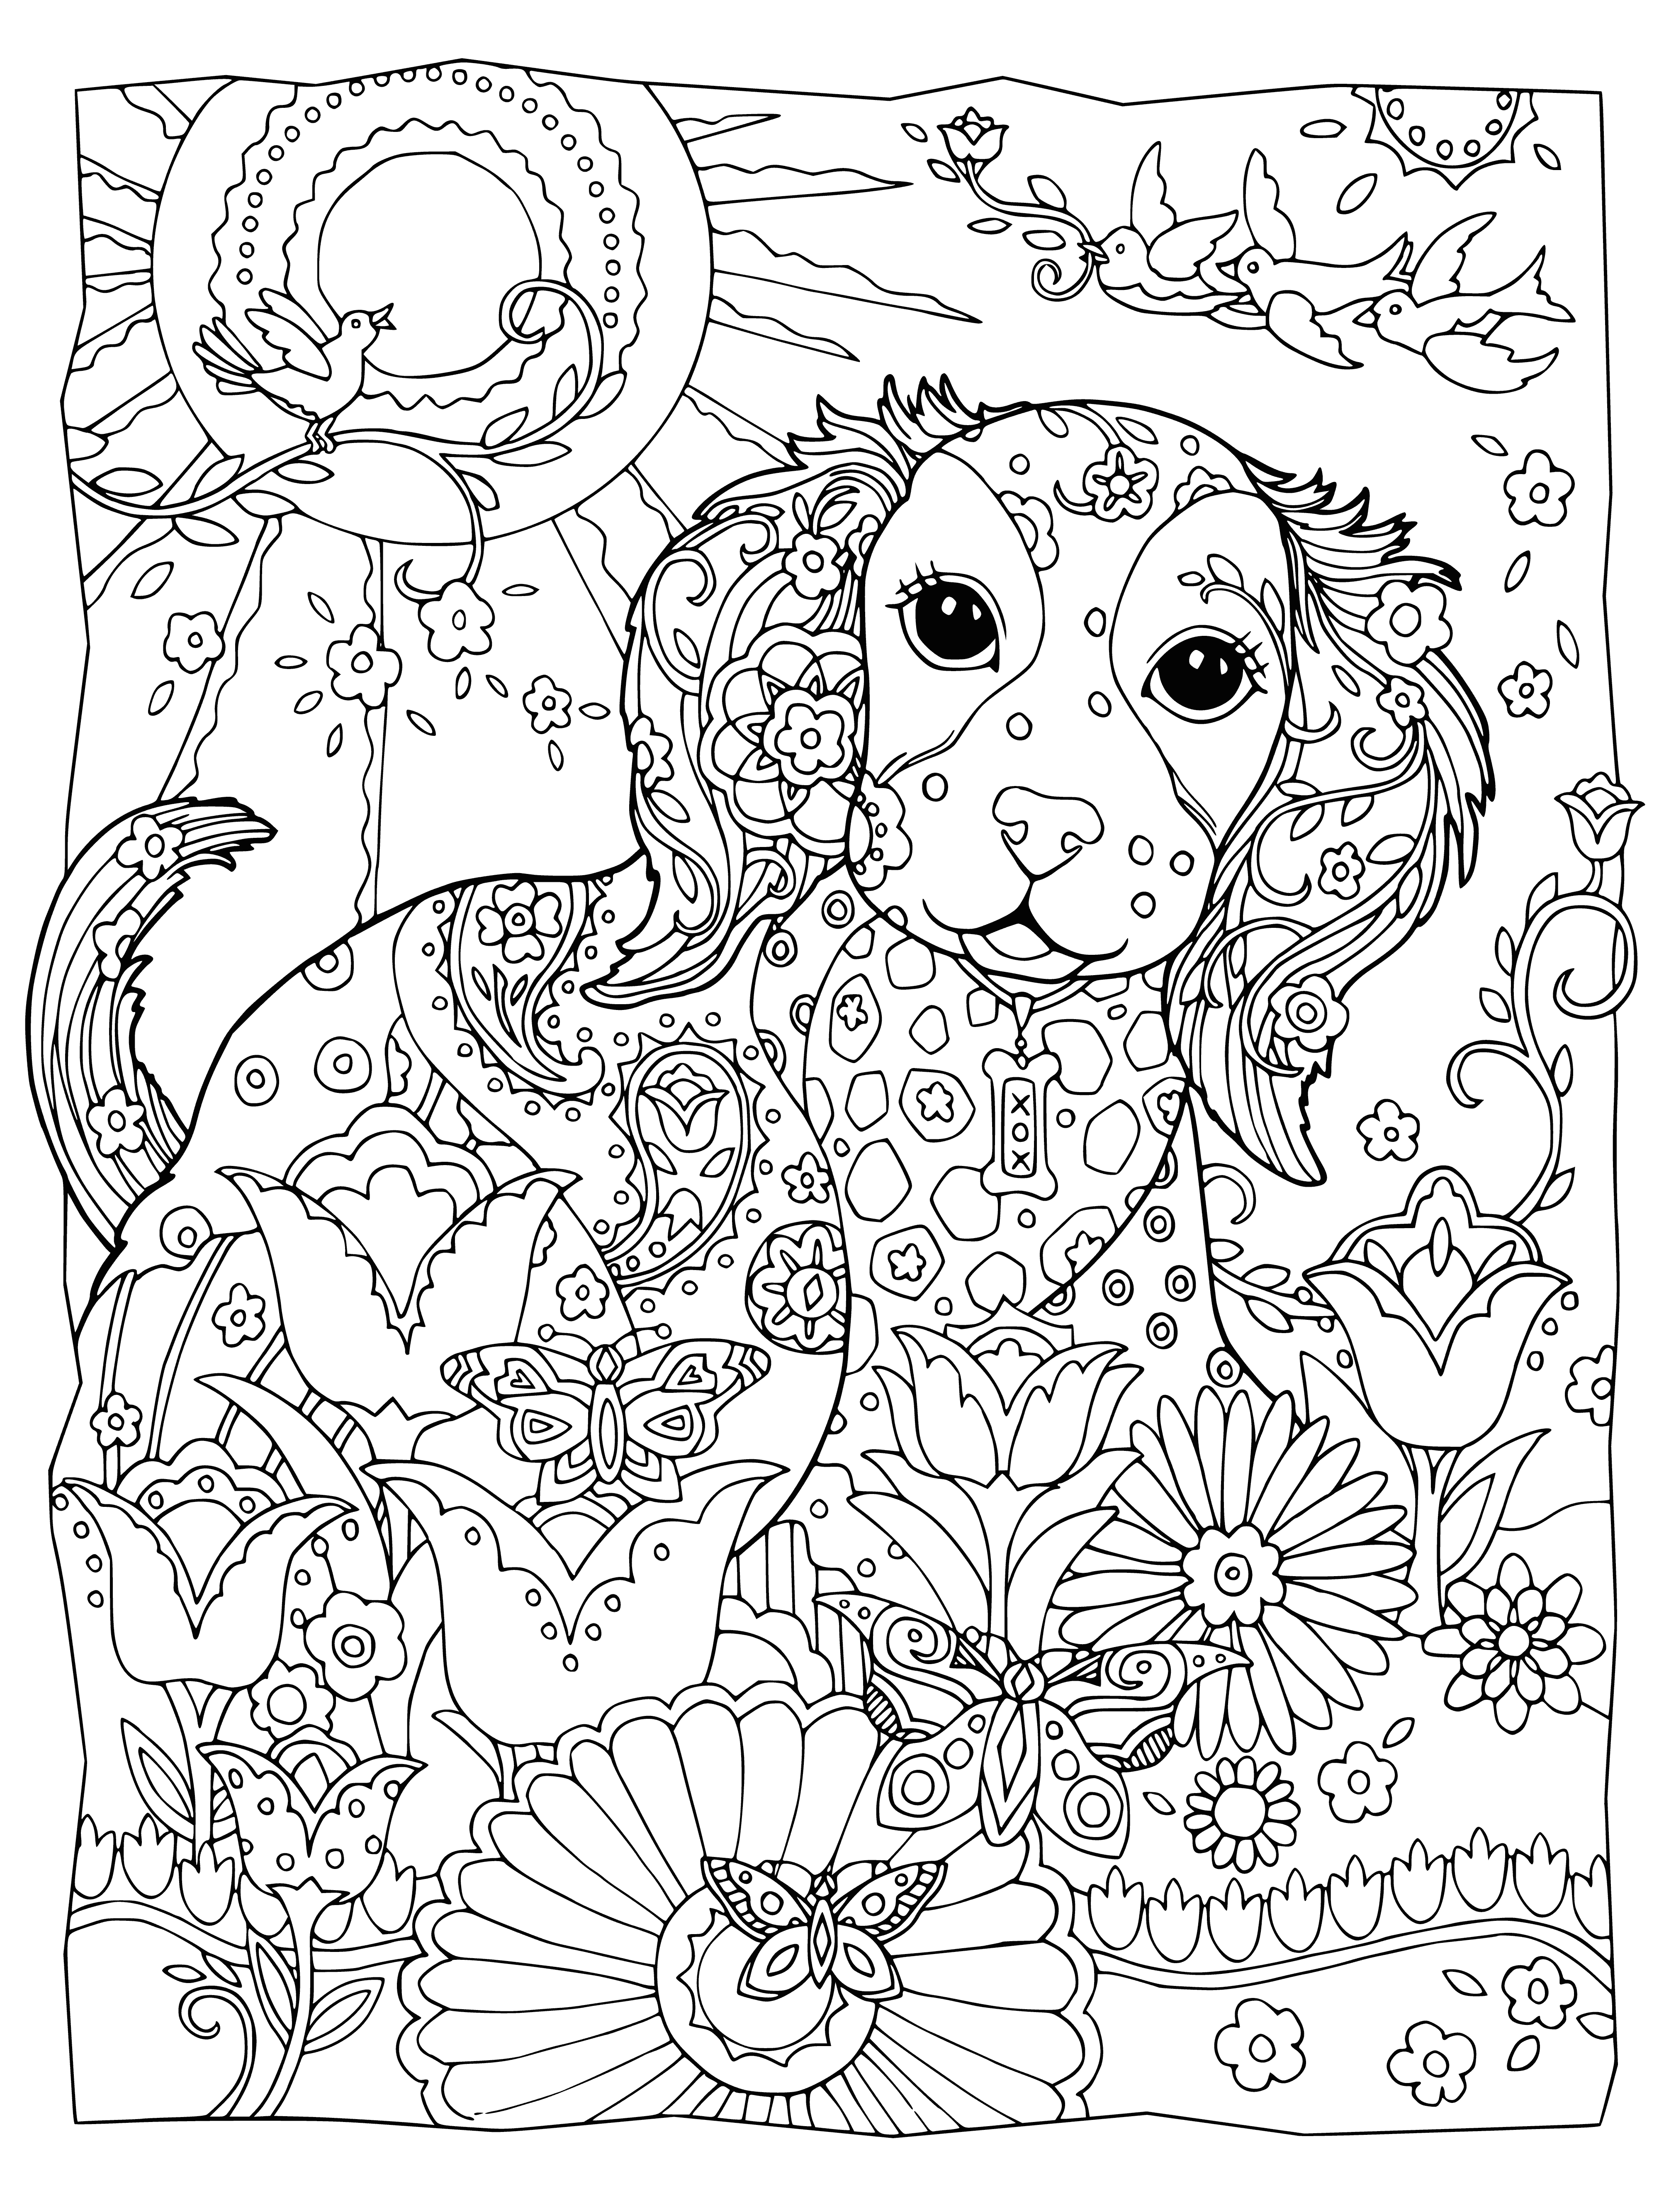 In the garden coloring page